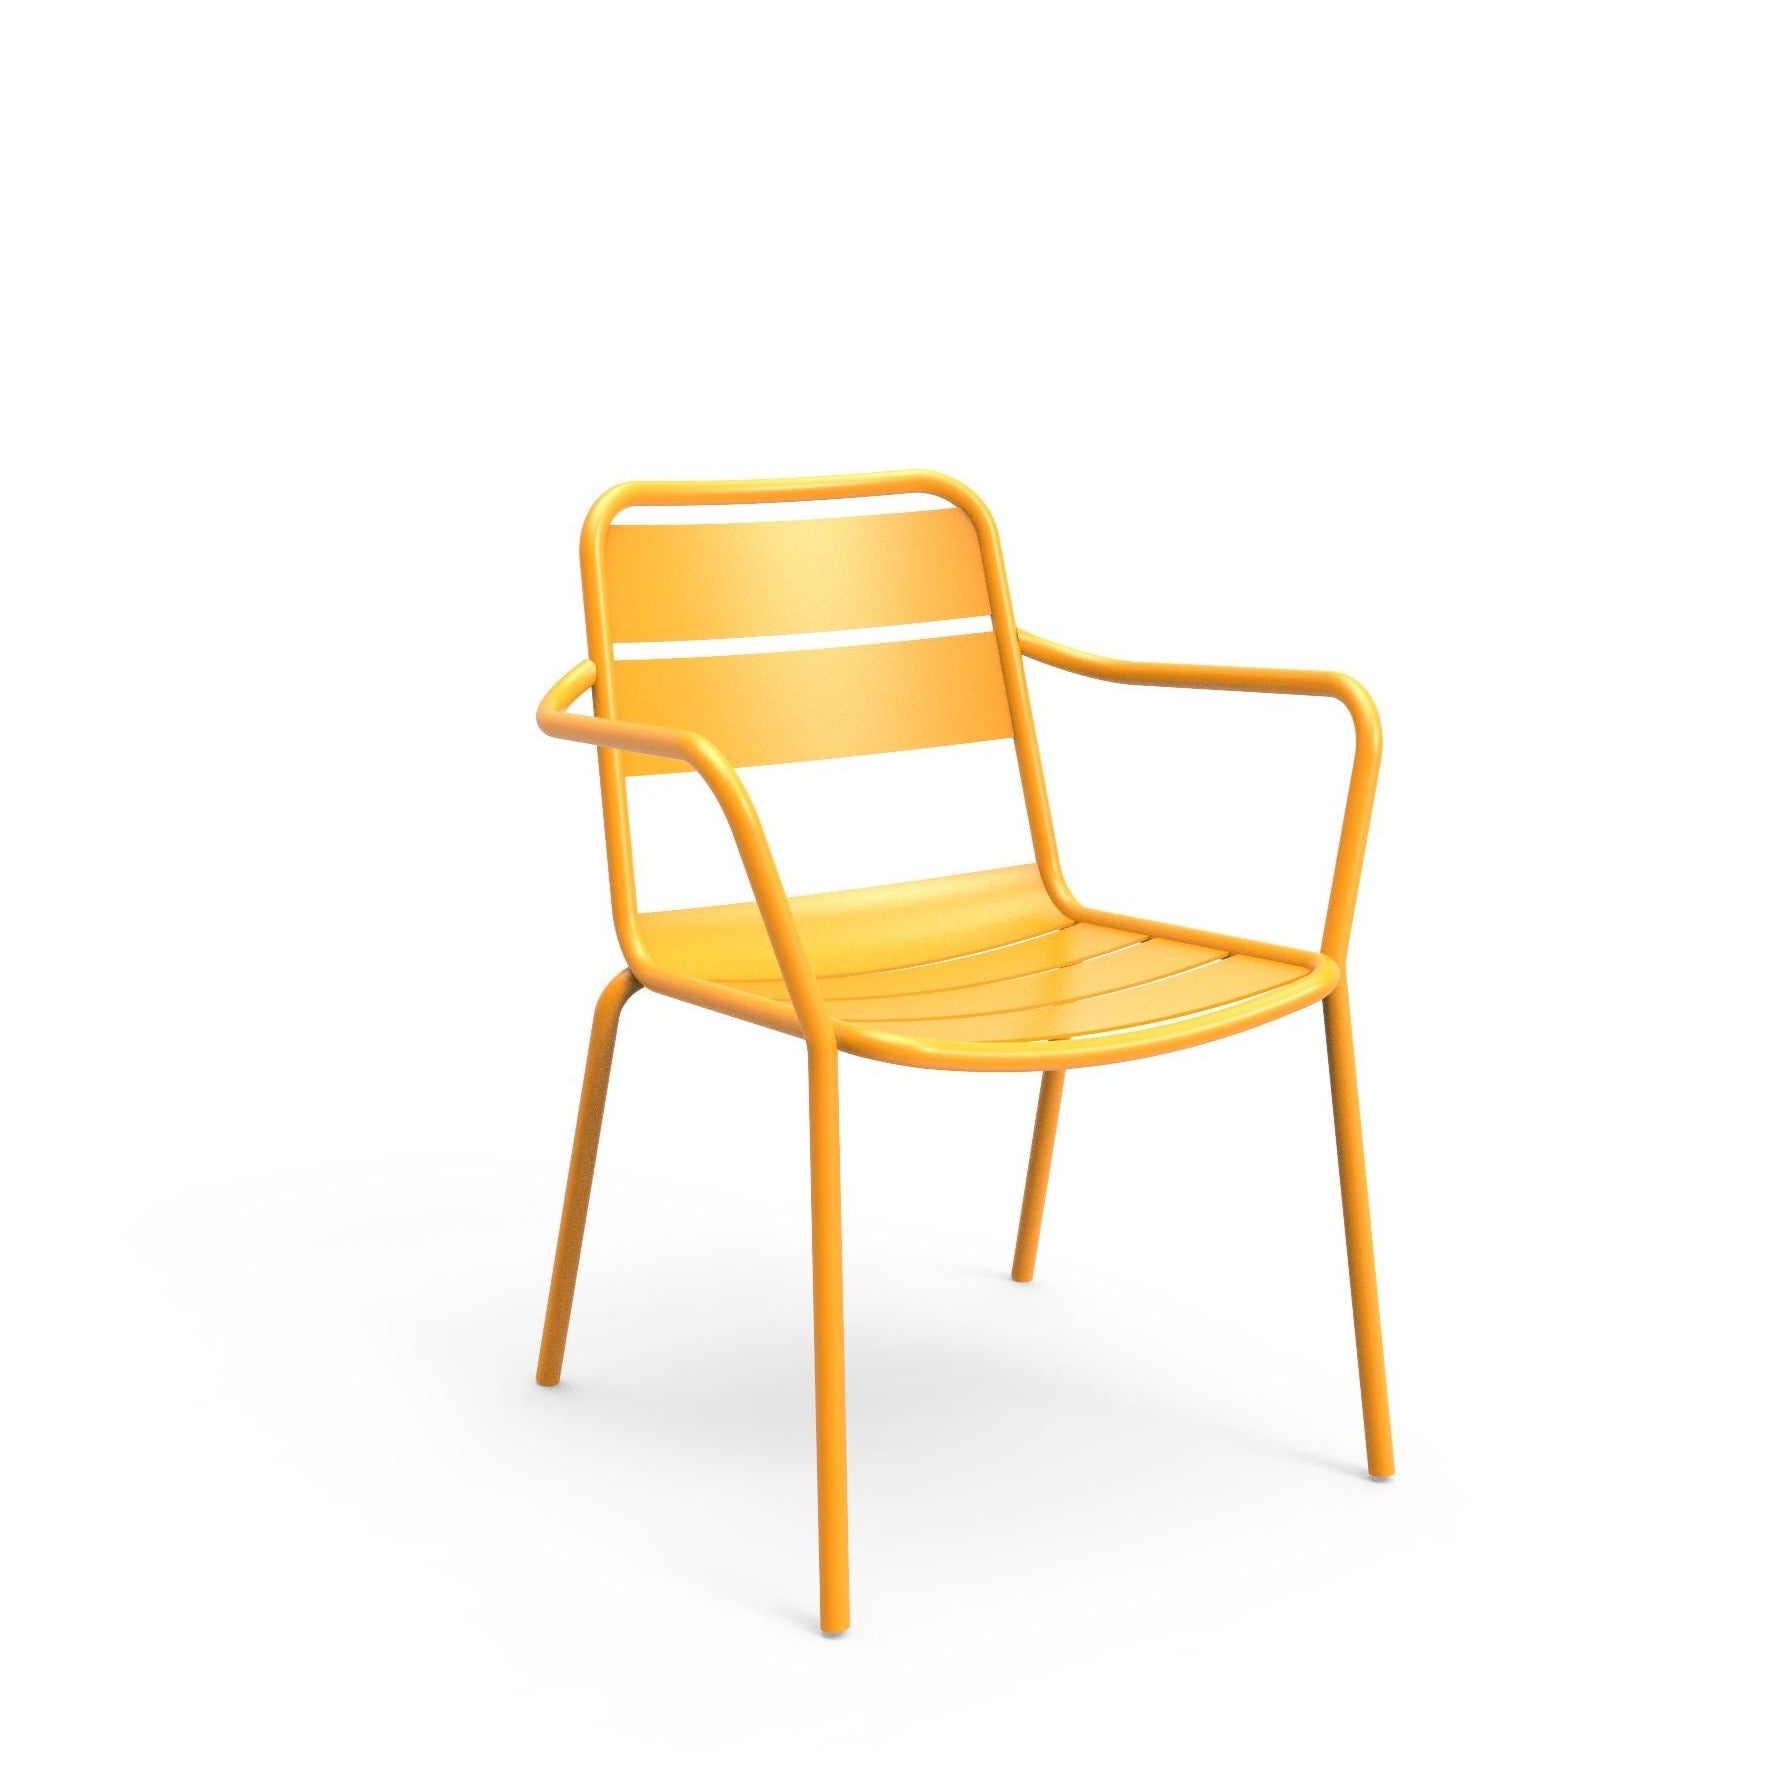 Sprout Arm Lounge Chair